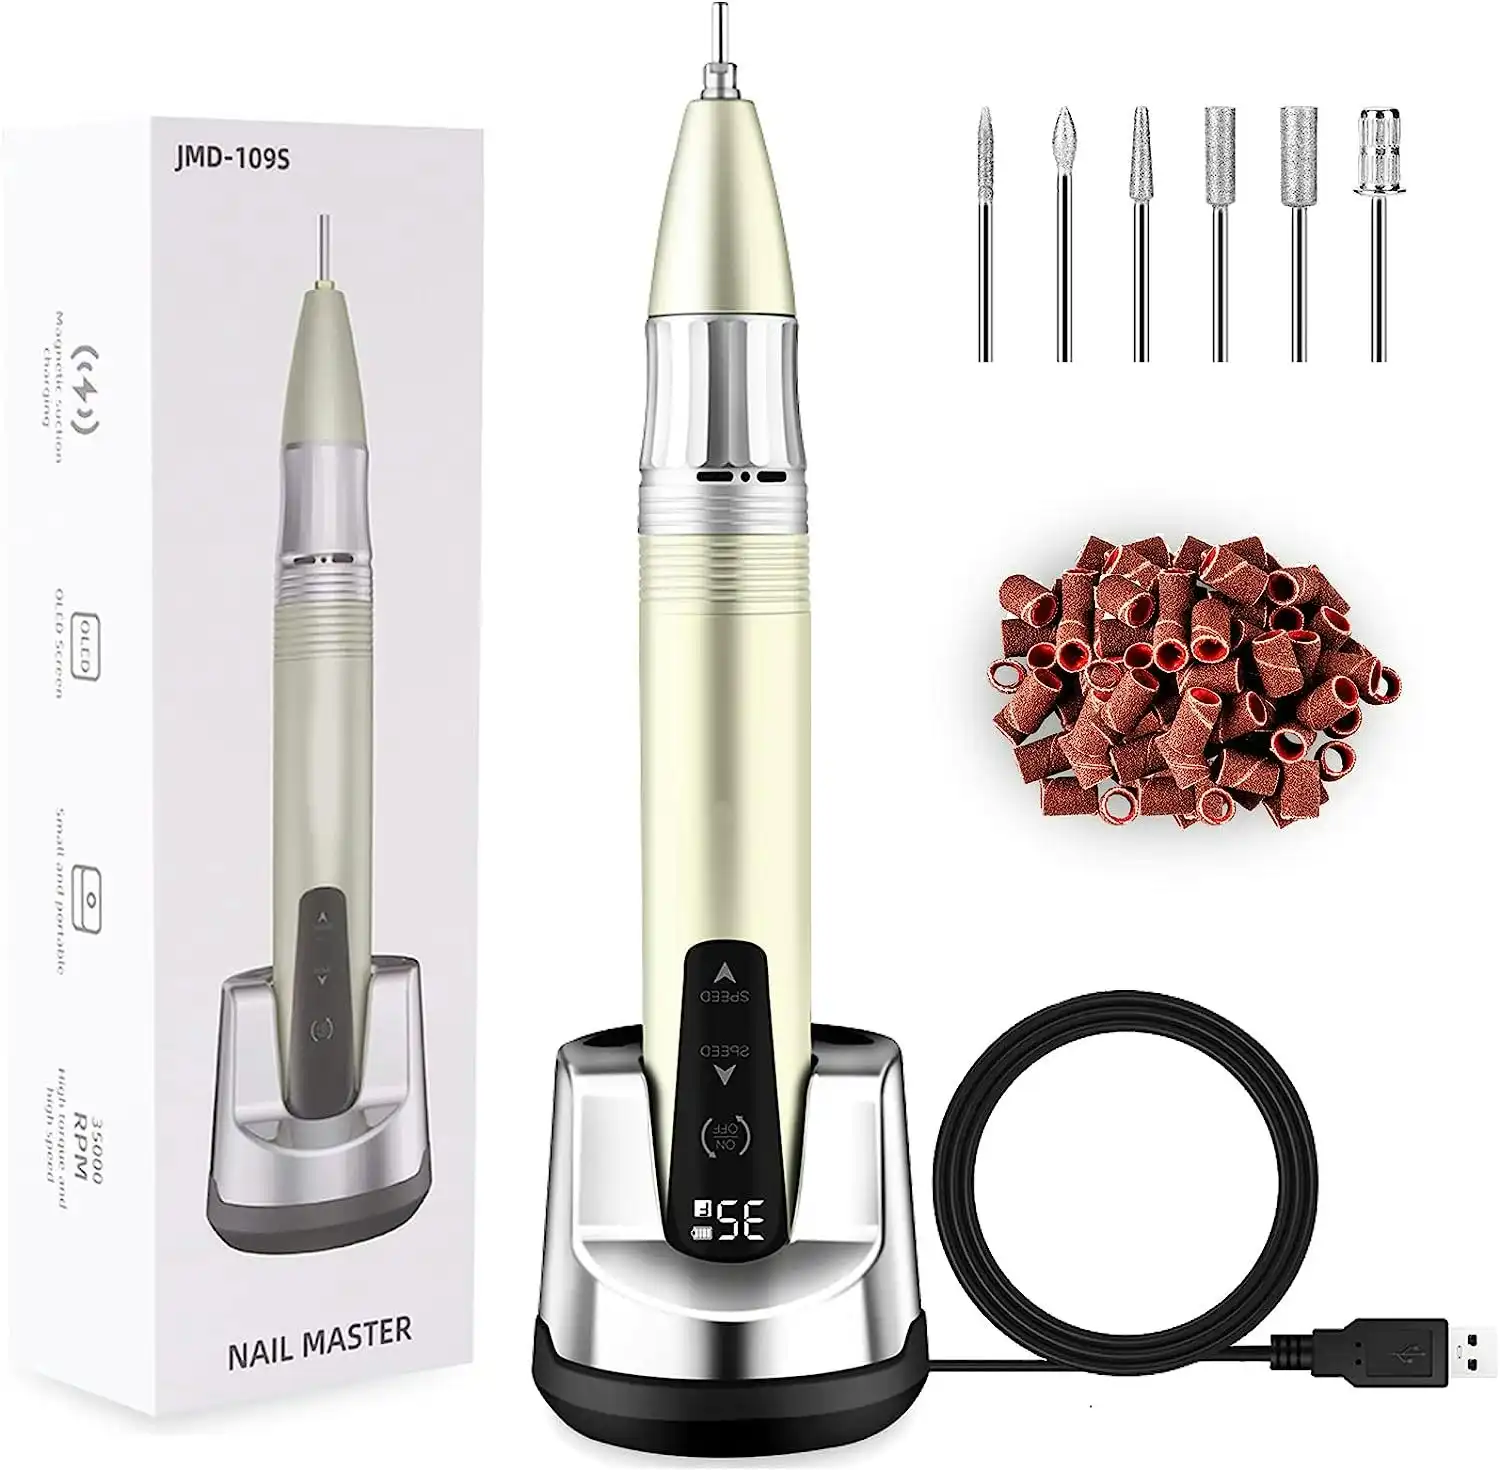 Rechargeable Nail Drill, 35000 RPM, Cordless Electric Nail File, Wireless Efile for Acrylic Gel Nails, Manicure Pedicure Polishing